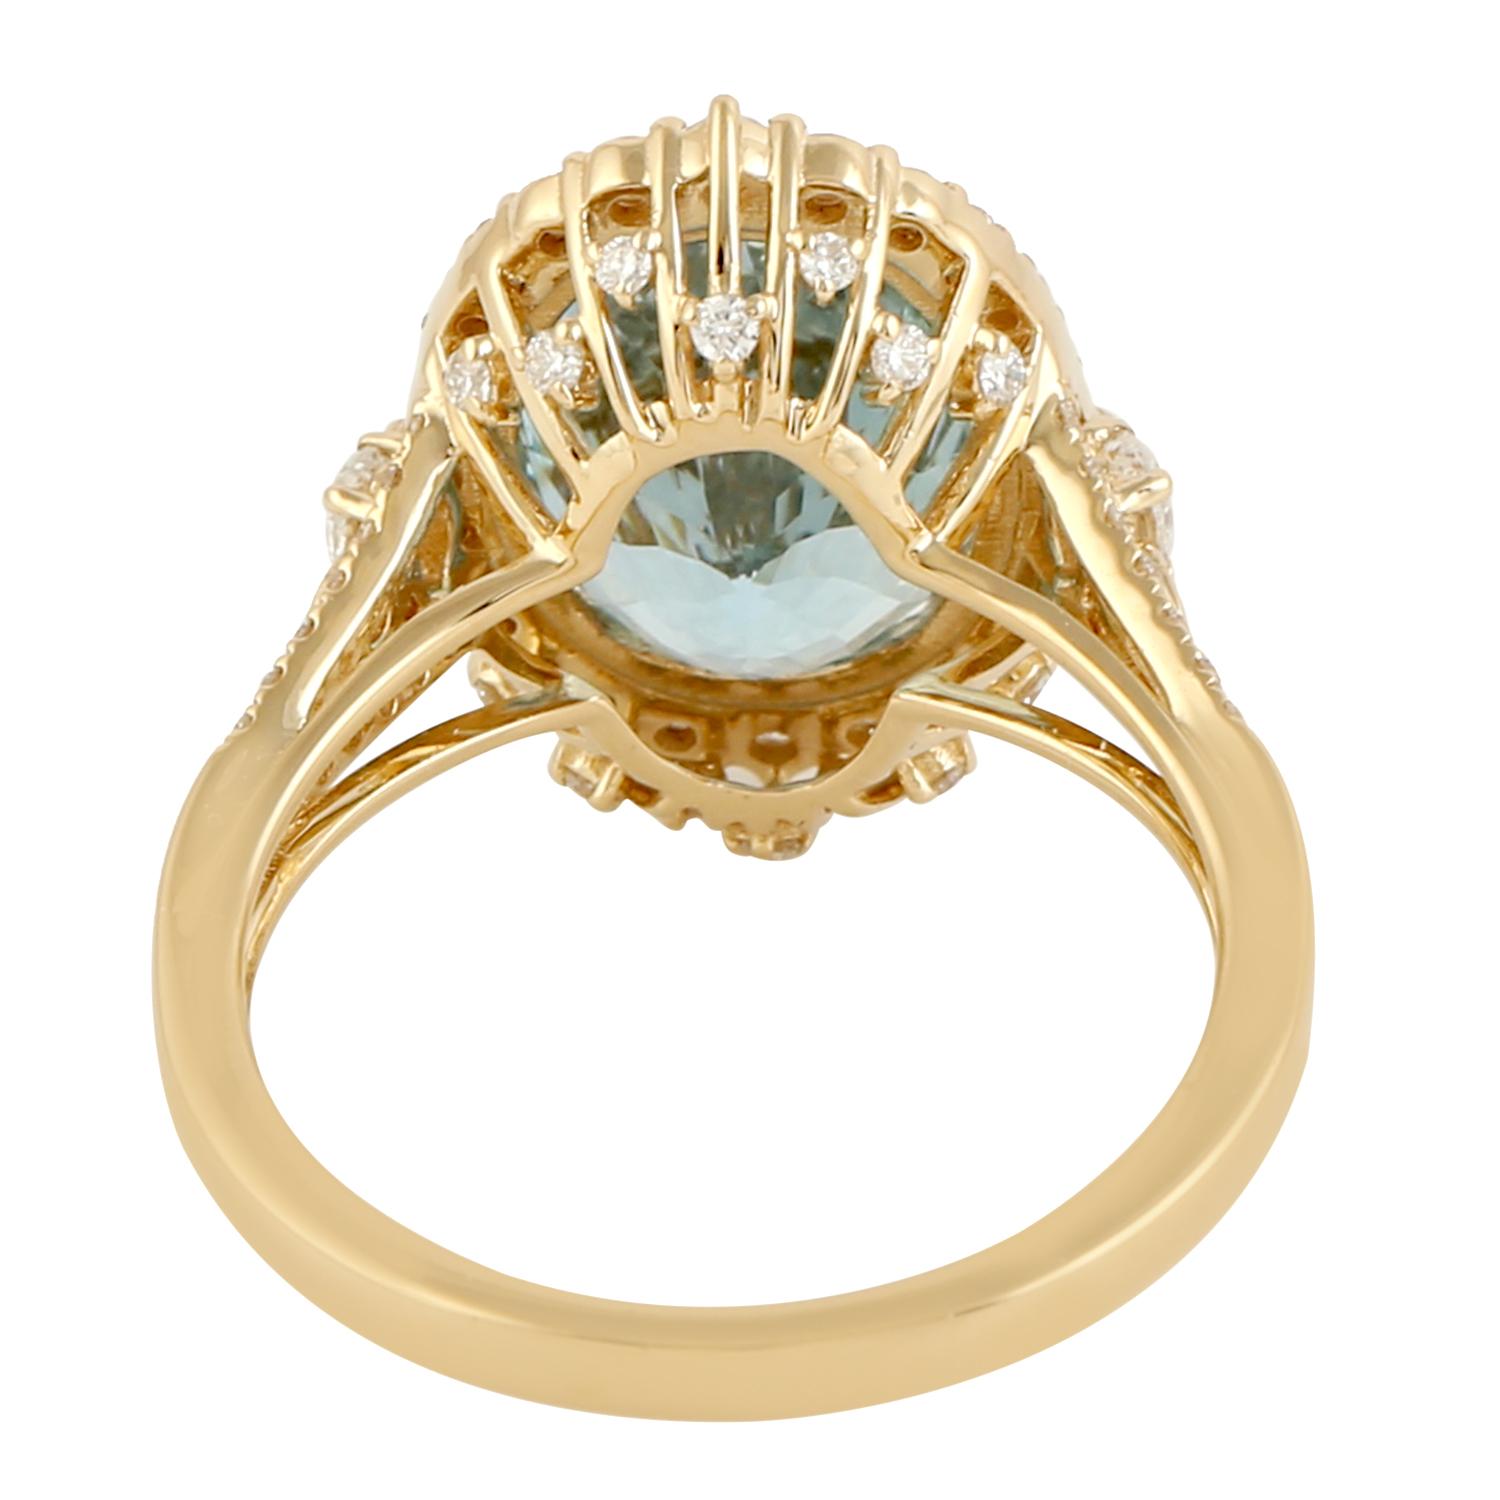 Modern Classic Oval Shape Aquamarine Cocktail Solitaire Ring with Diamonds in 18k Gold